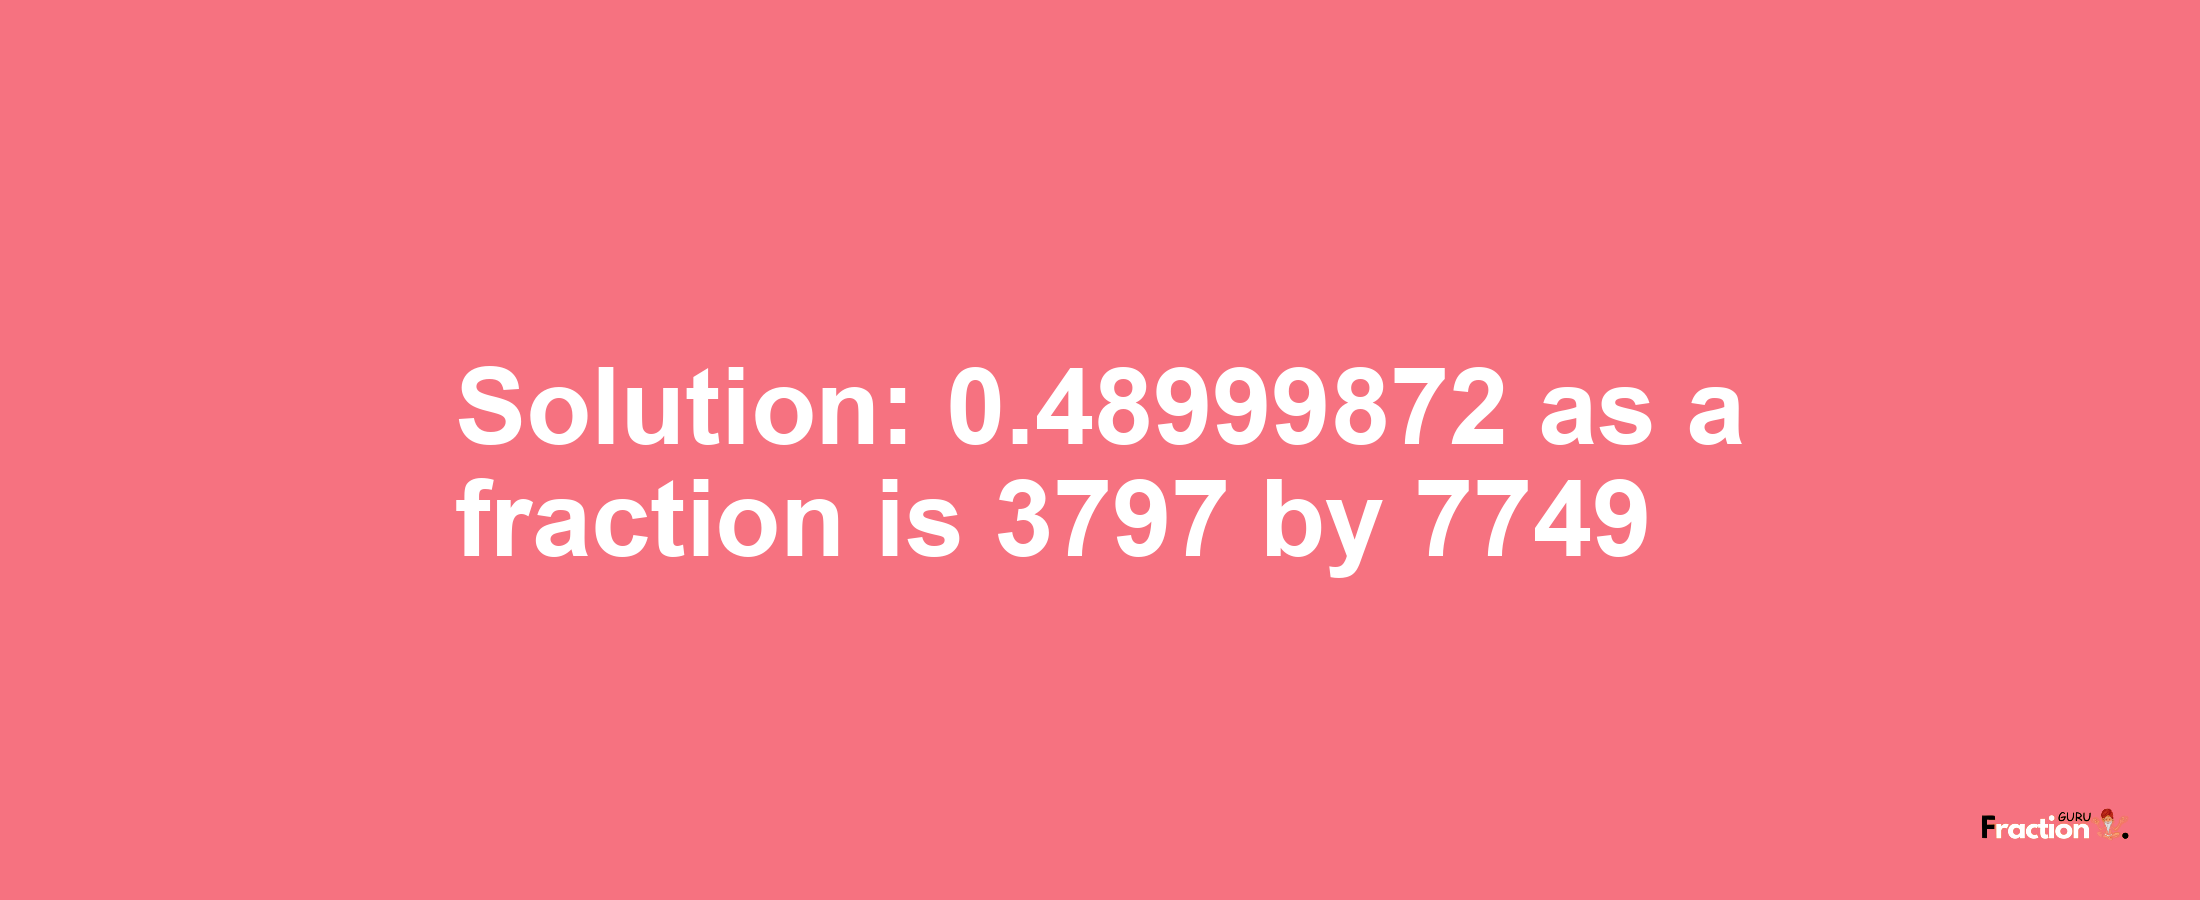 Solution:0.48999872 as a fraction is 3797/7749